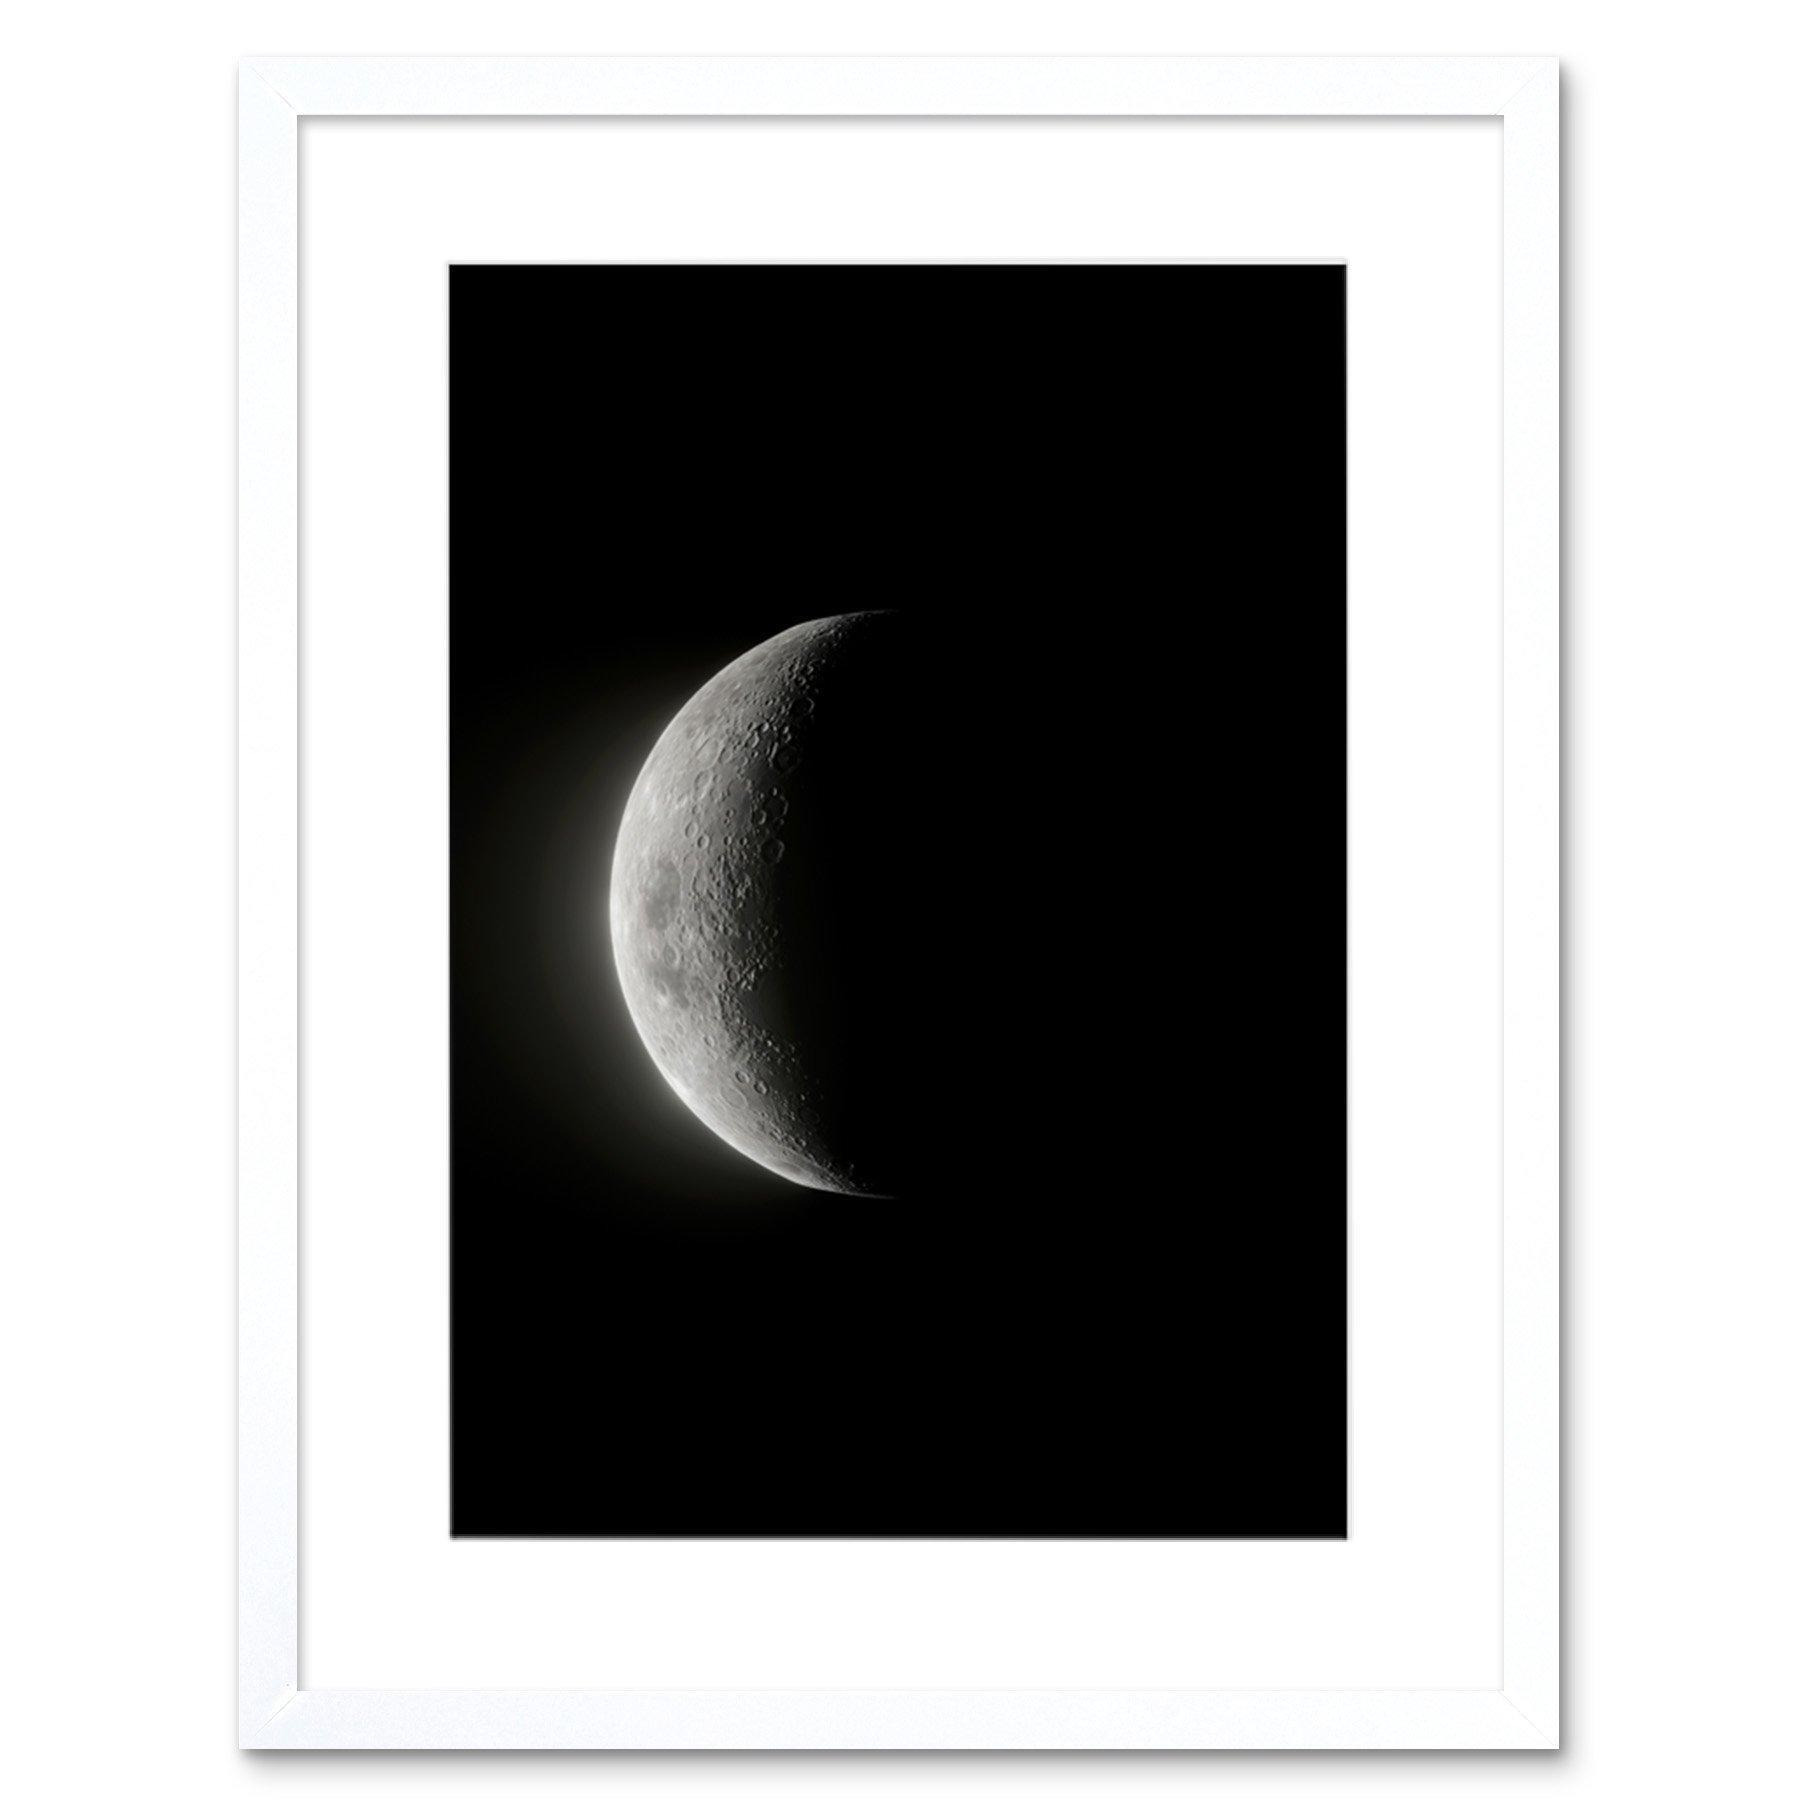 Lunar Phases Moon Waning Crescent Space Astronomy Artwork Framed Wall Art Print 9X7 Inch - image 1